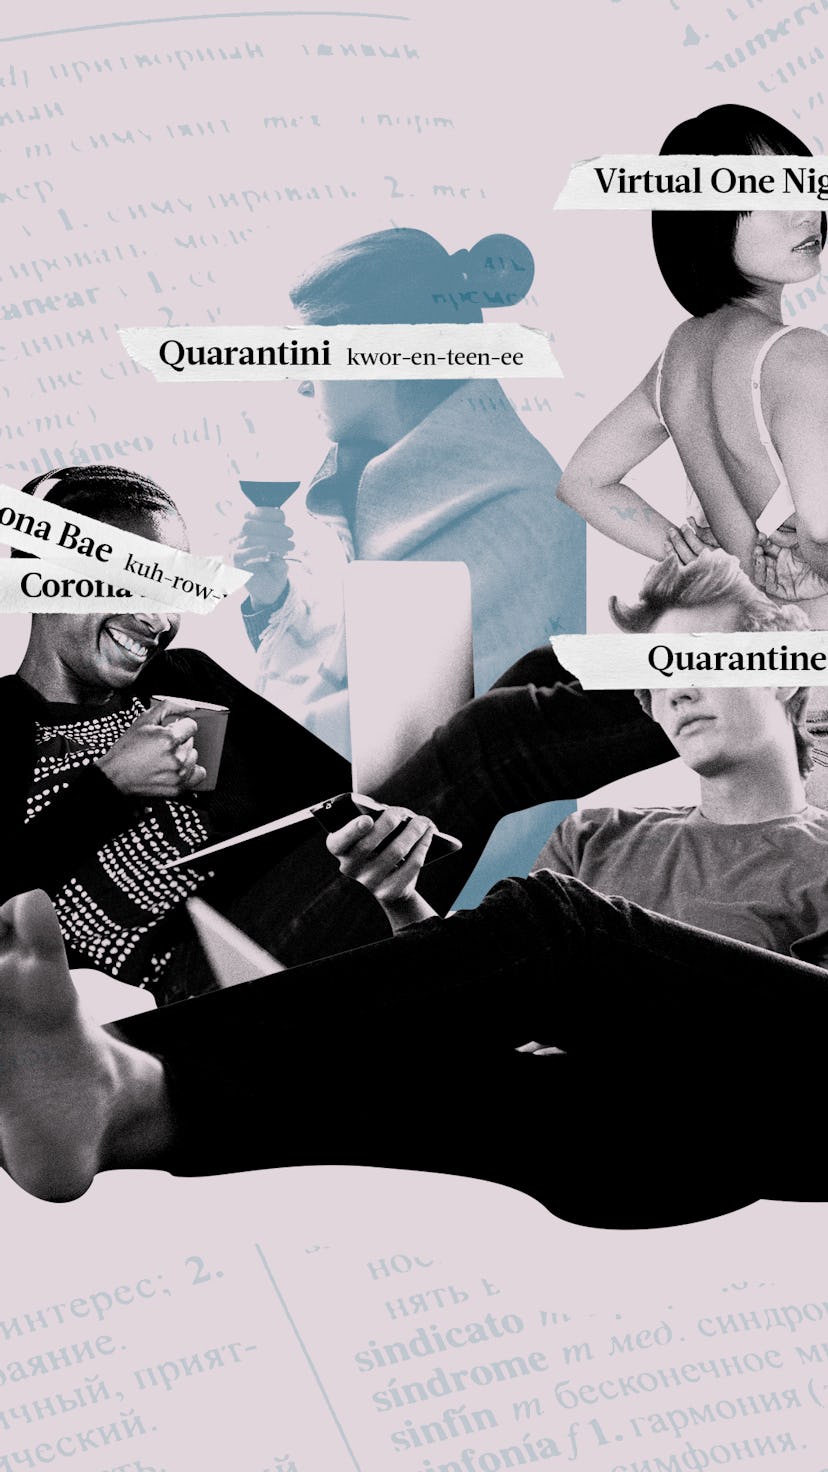 A collage with people's quarantine dating rituals